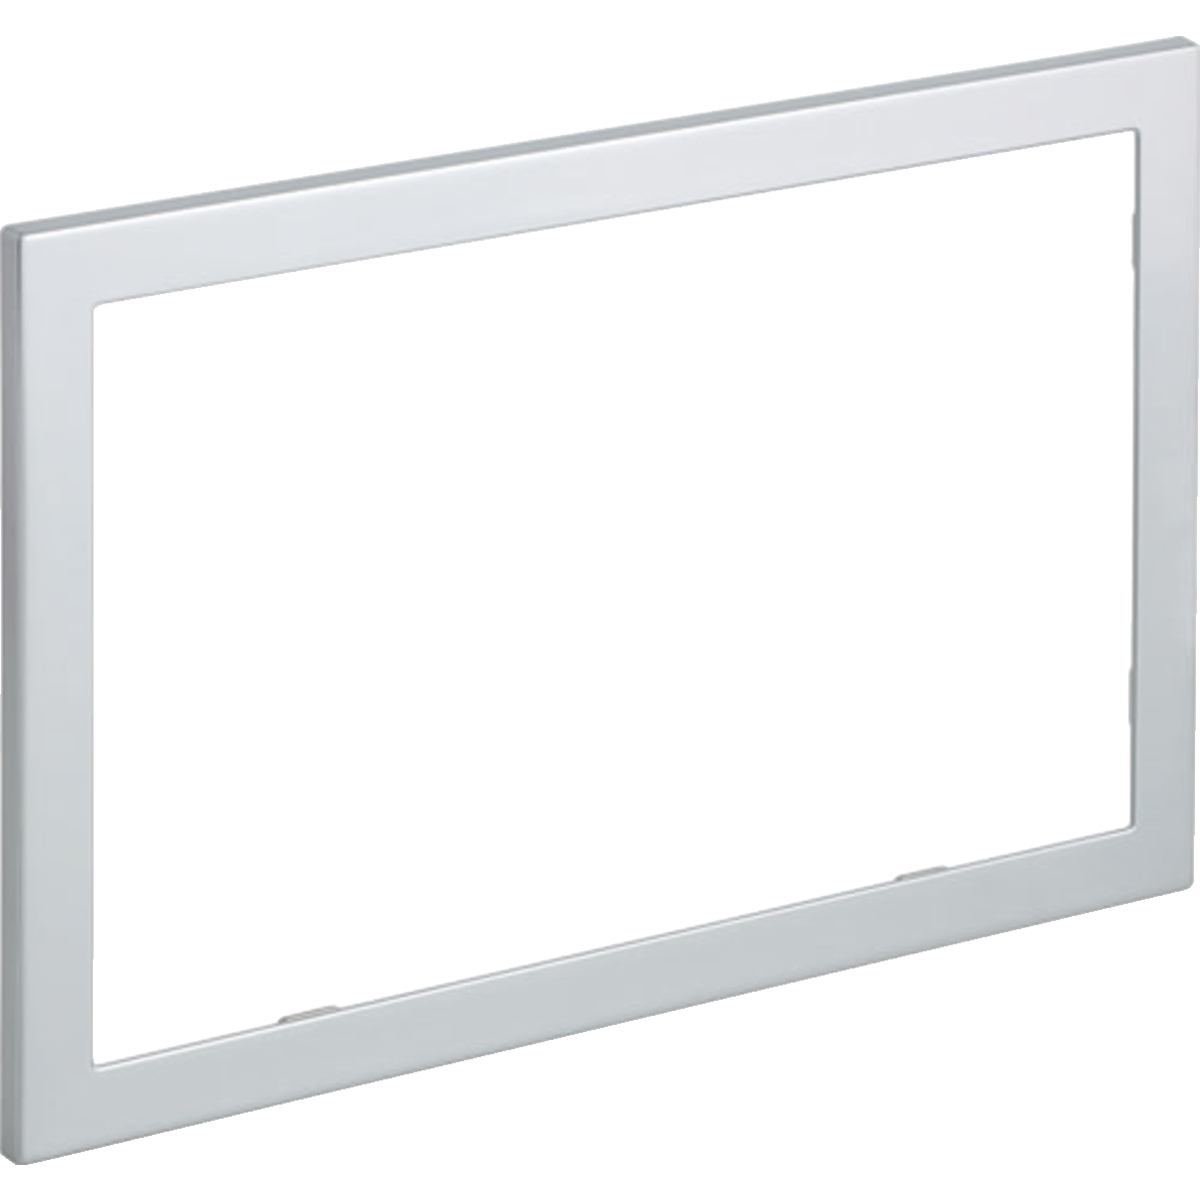 Geberit 115.086.21.1 Cover Frame for Actuator Plate Omega60 - Bright Chrome-Plated